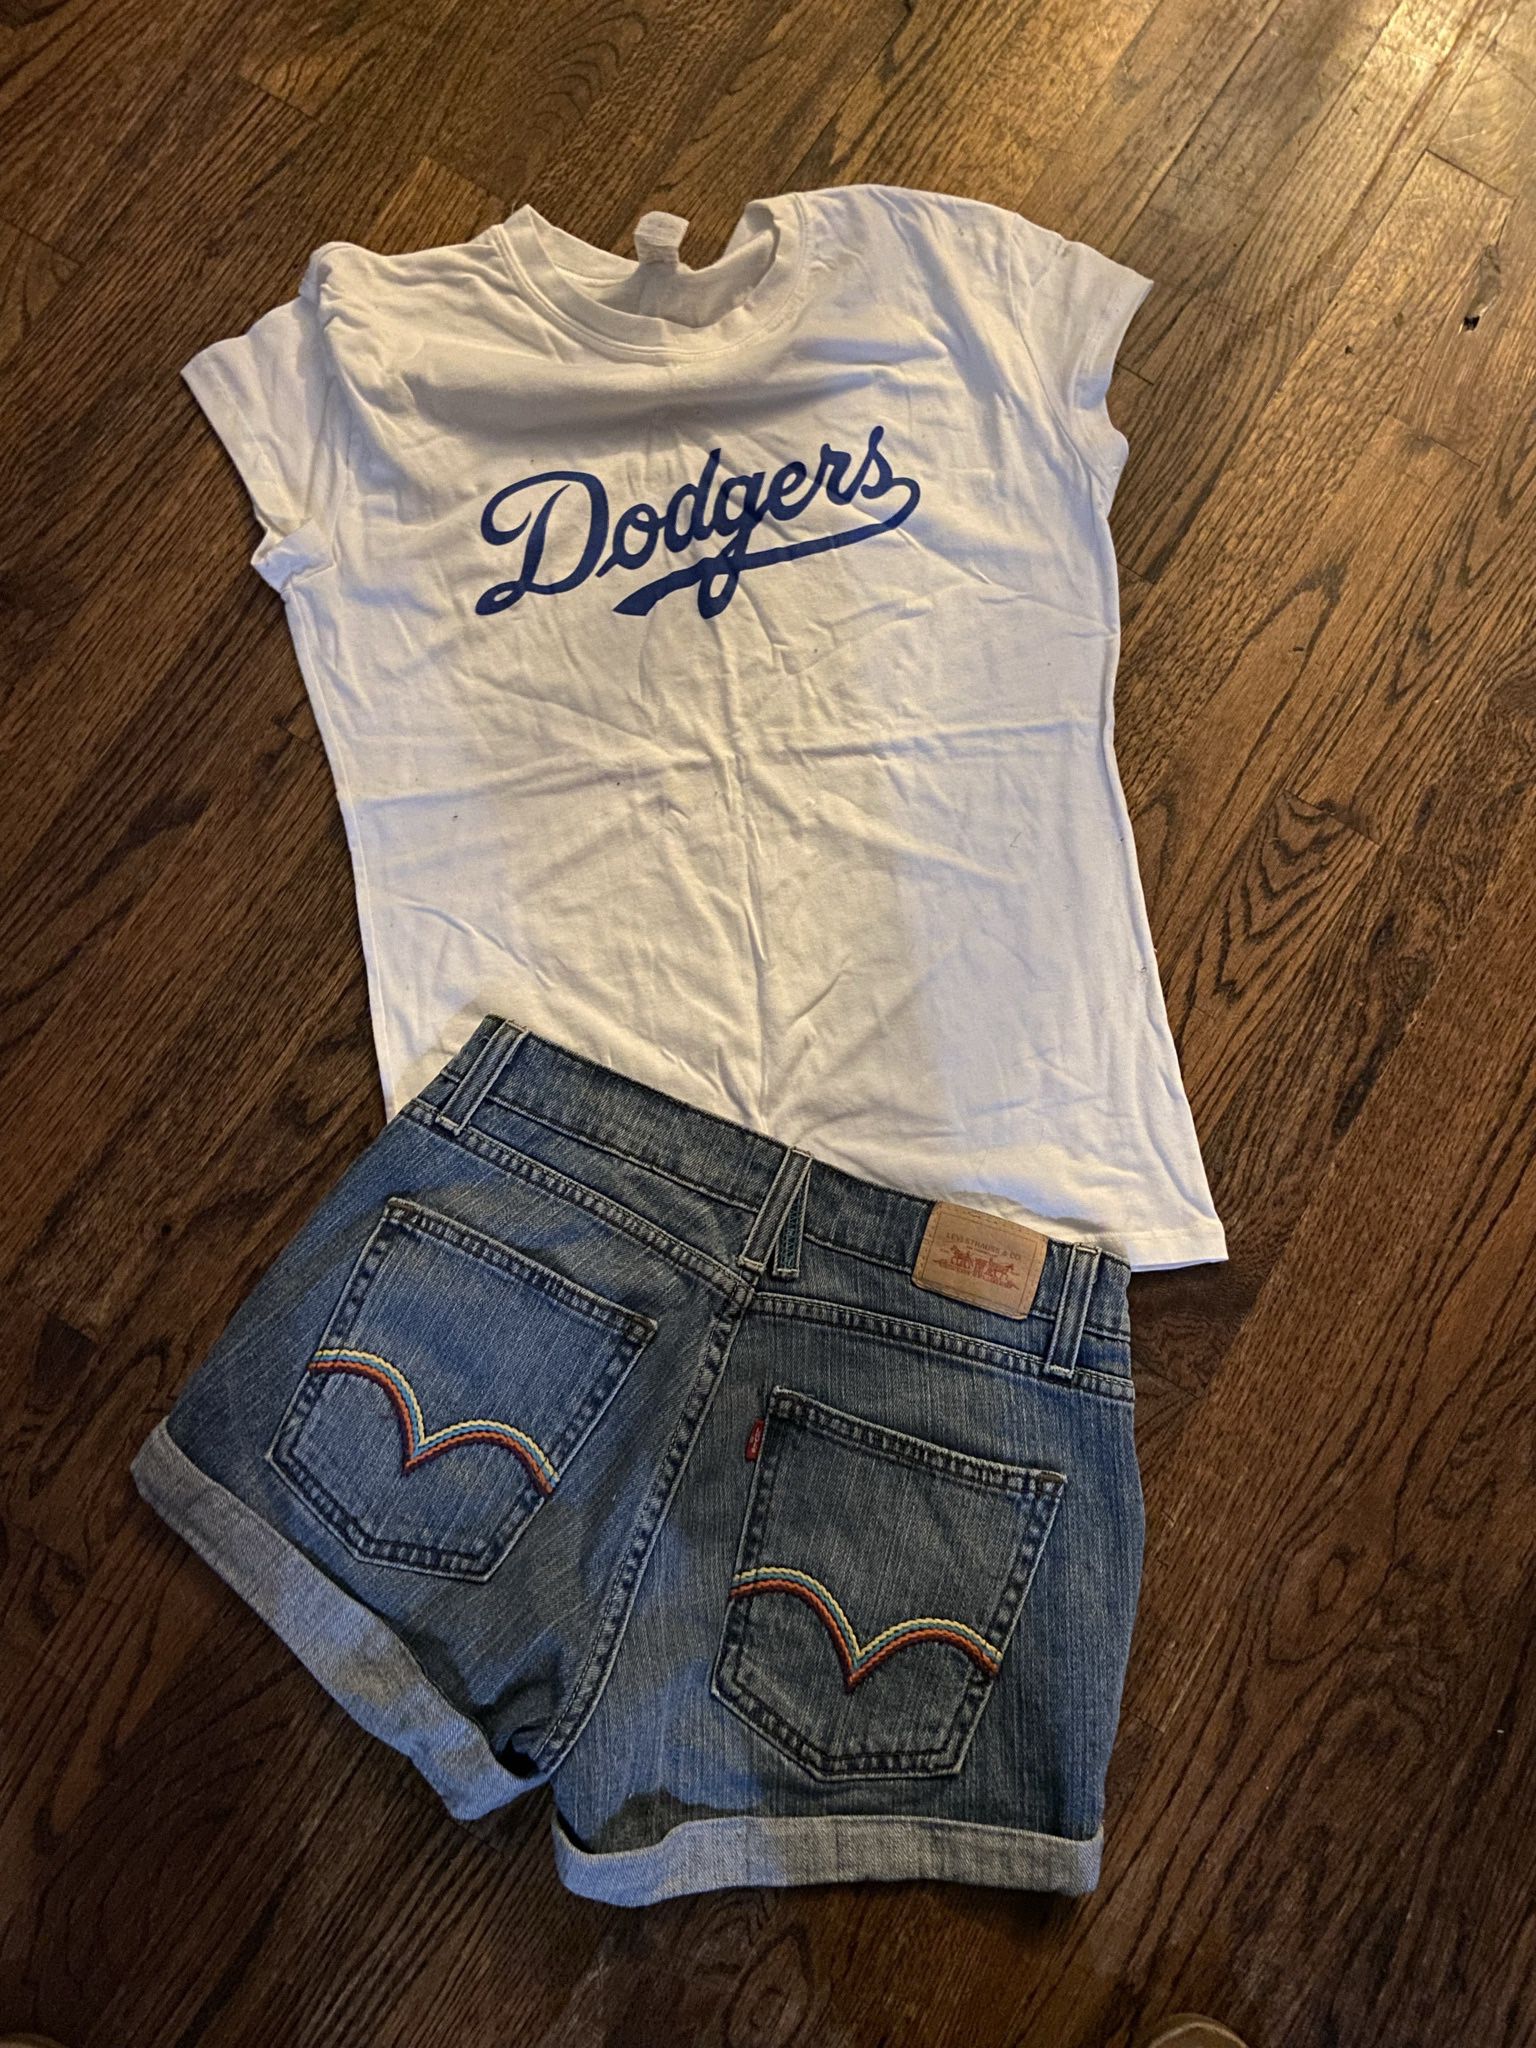 Levis Shorts And T-shirt With Dodger Logo 